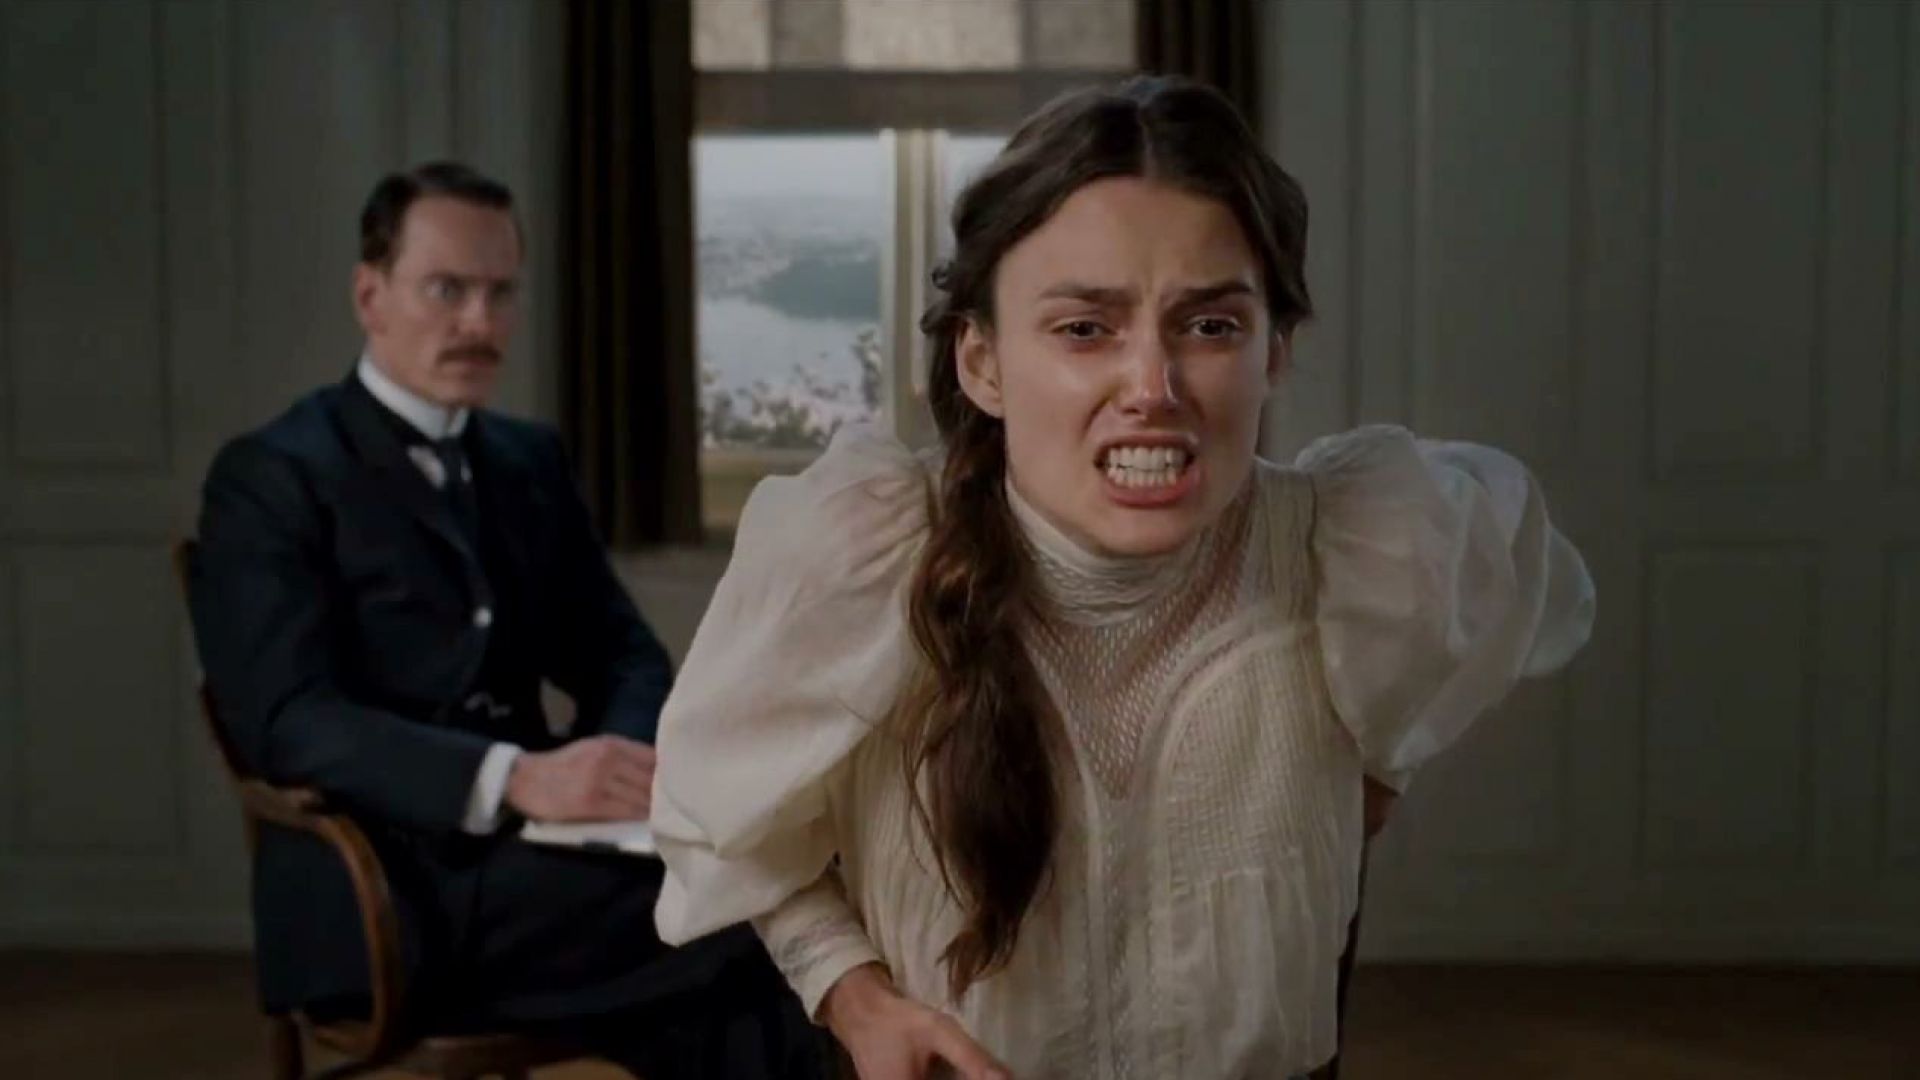 HD Quality Wallpaper | Collection: Movie, 1920x1080 A Dangerous Method